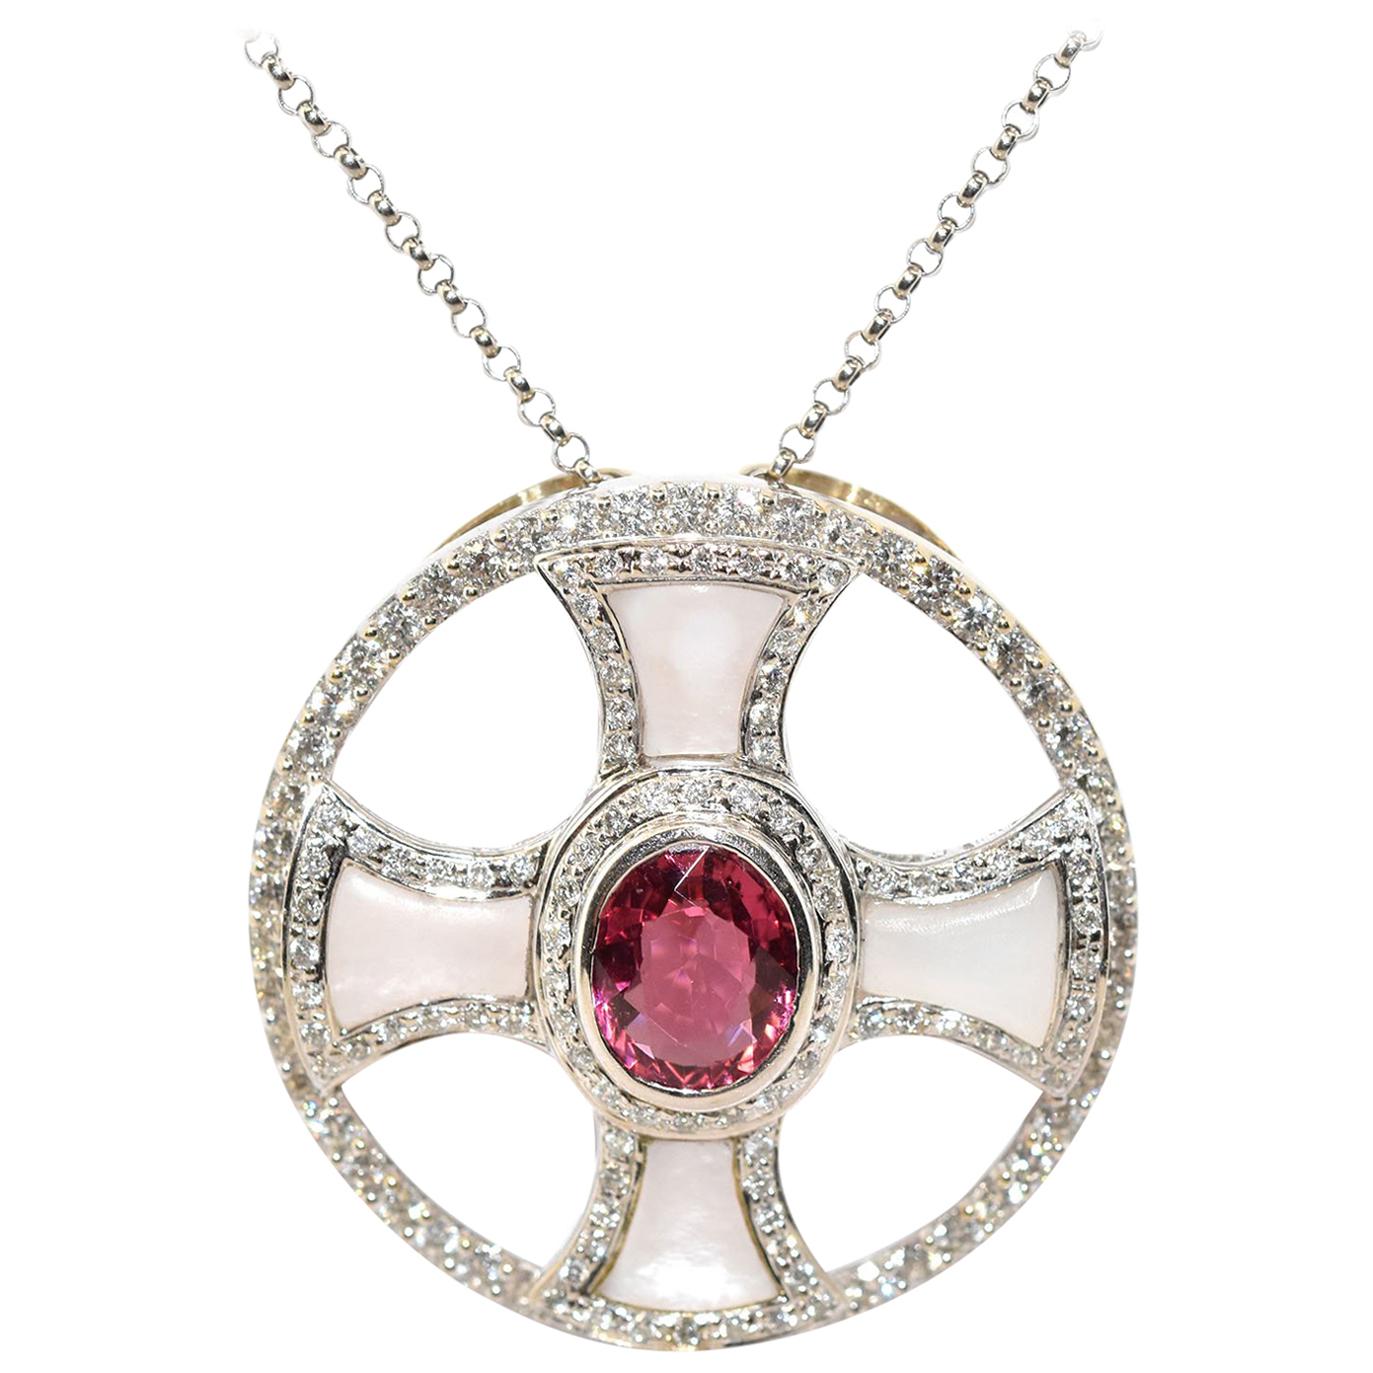 14 Karat White Gold, Diamond, Pink Tourmaline and Mother of Pearl Necklace